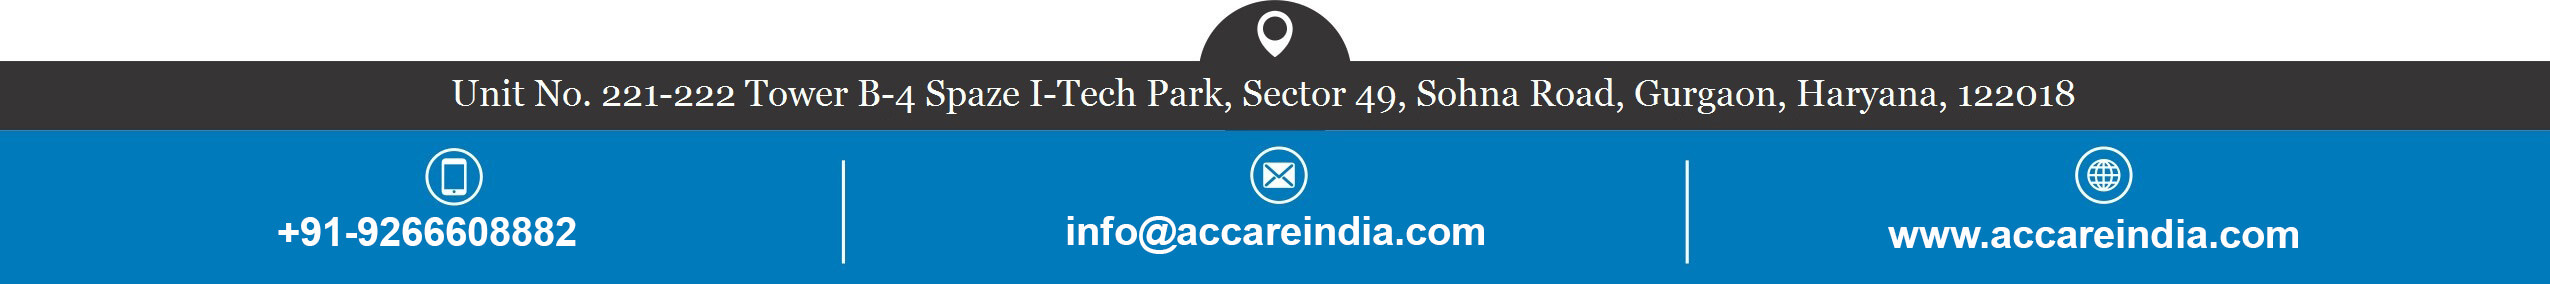 Ac Care India Footer Logo